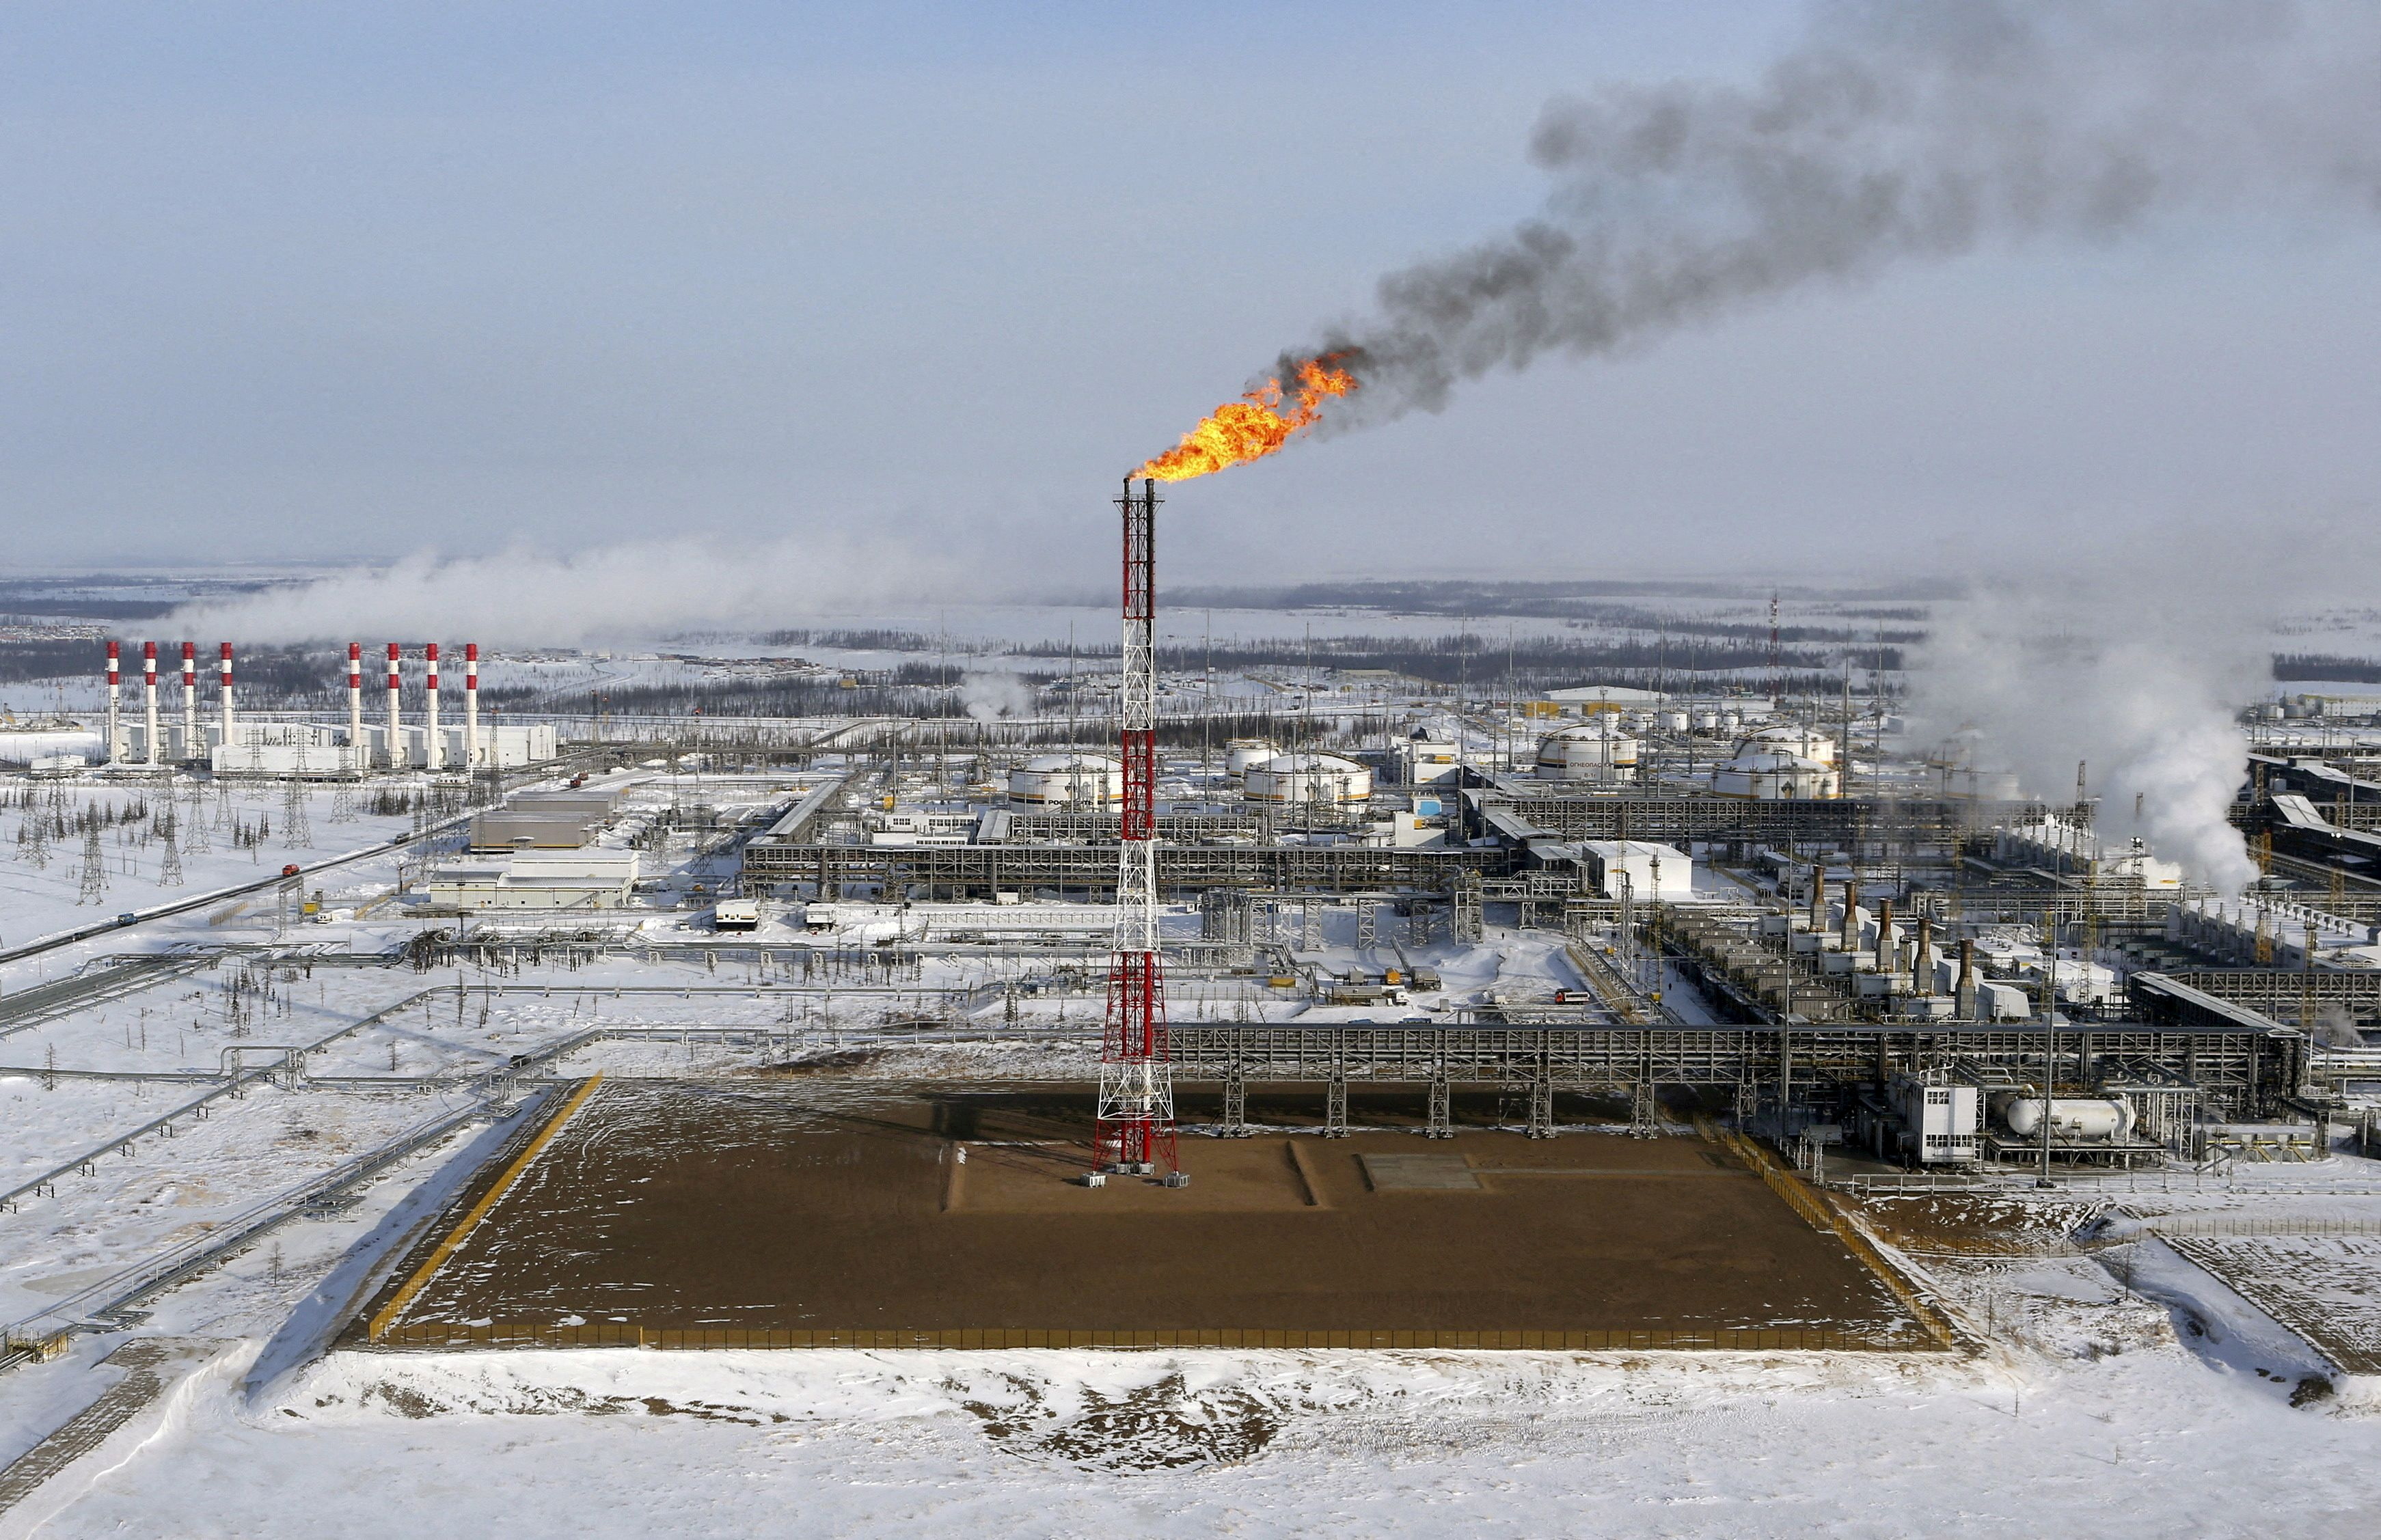 A flame burns from a tower at Vankorskoye oil field owned by Rosneft company north of the Russian Siberian city of Krasnoyarsk